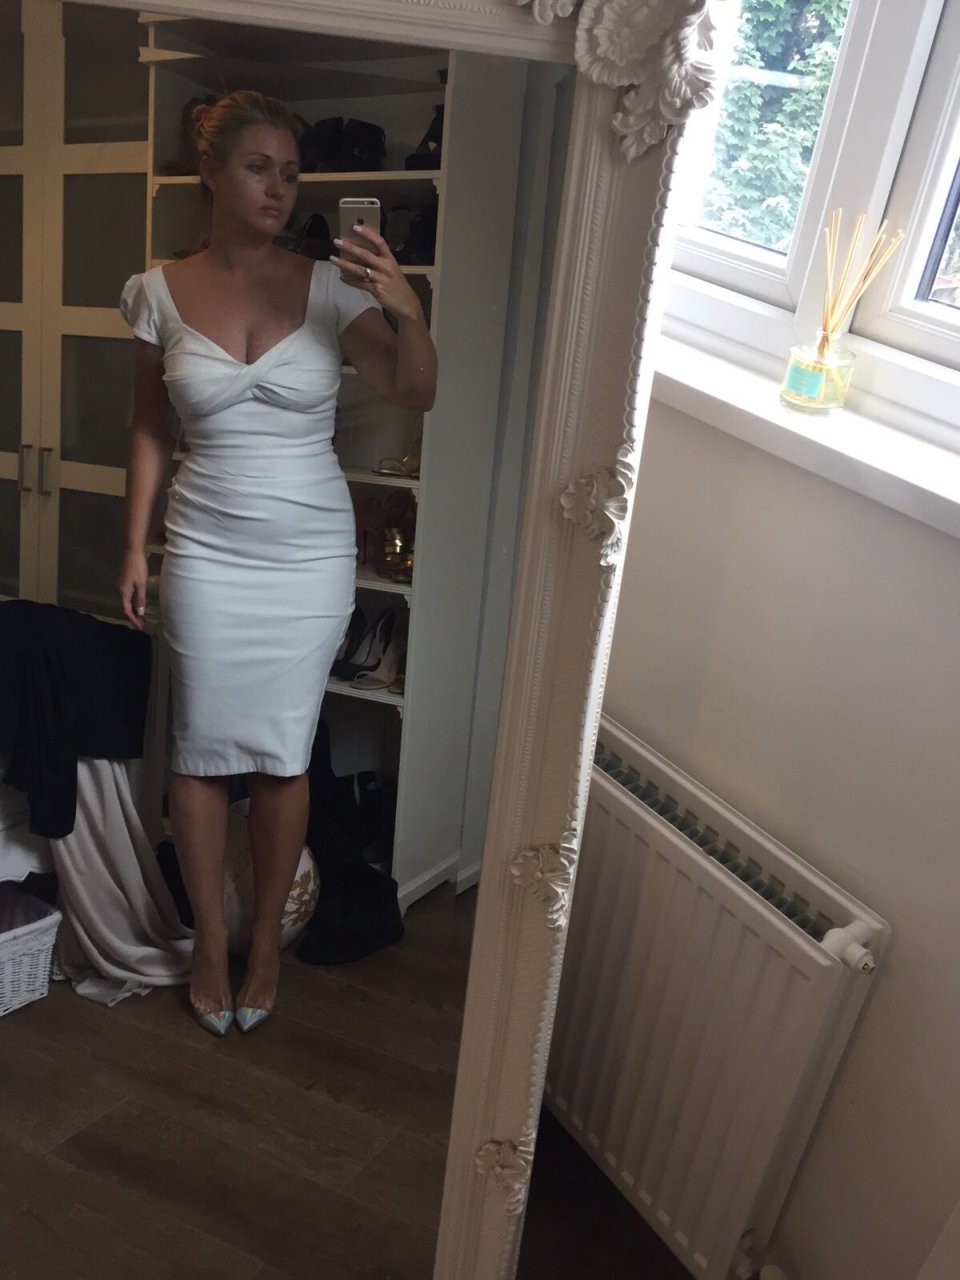 Hayley Mcqueen Leaked The Fappening Sexy Photos Thefappening